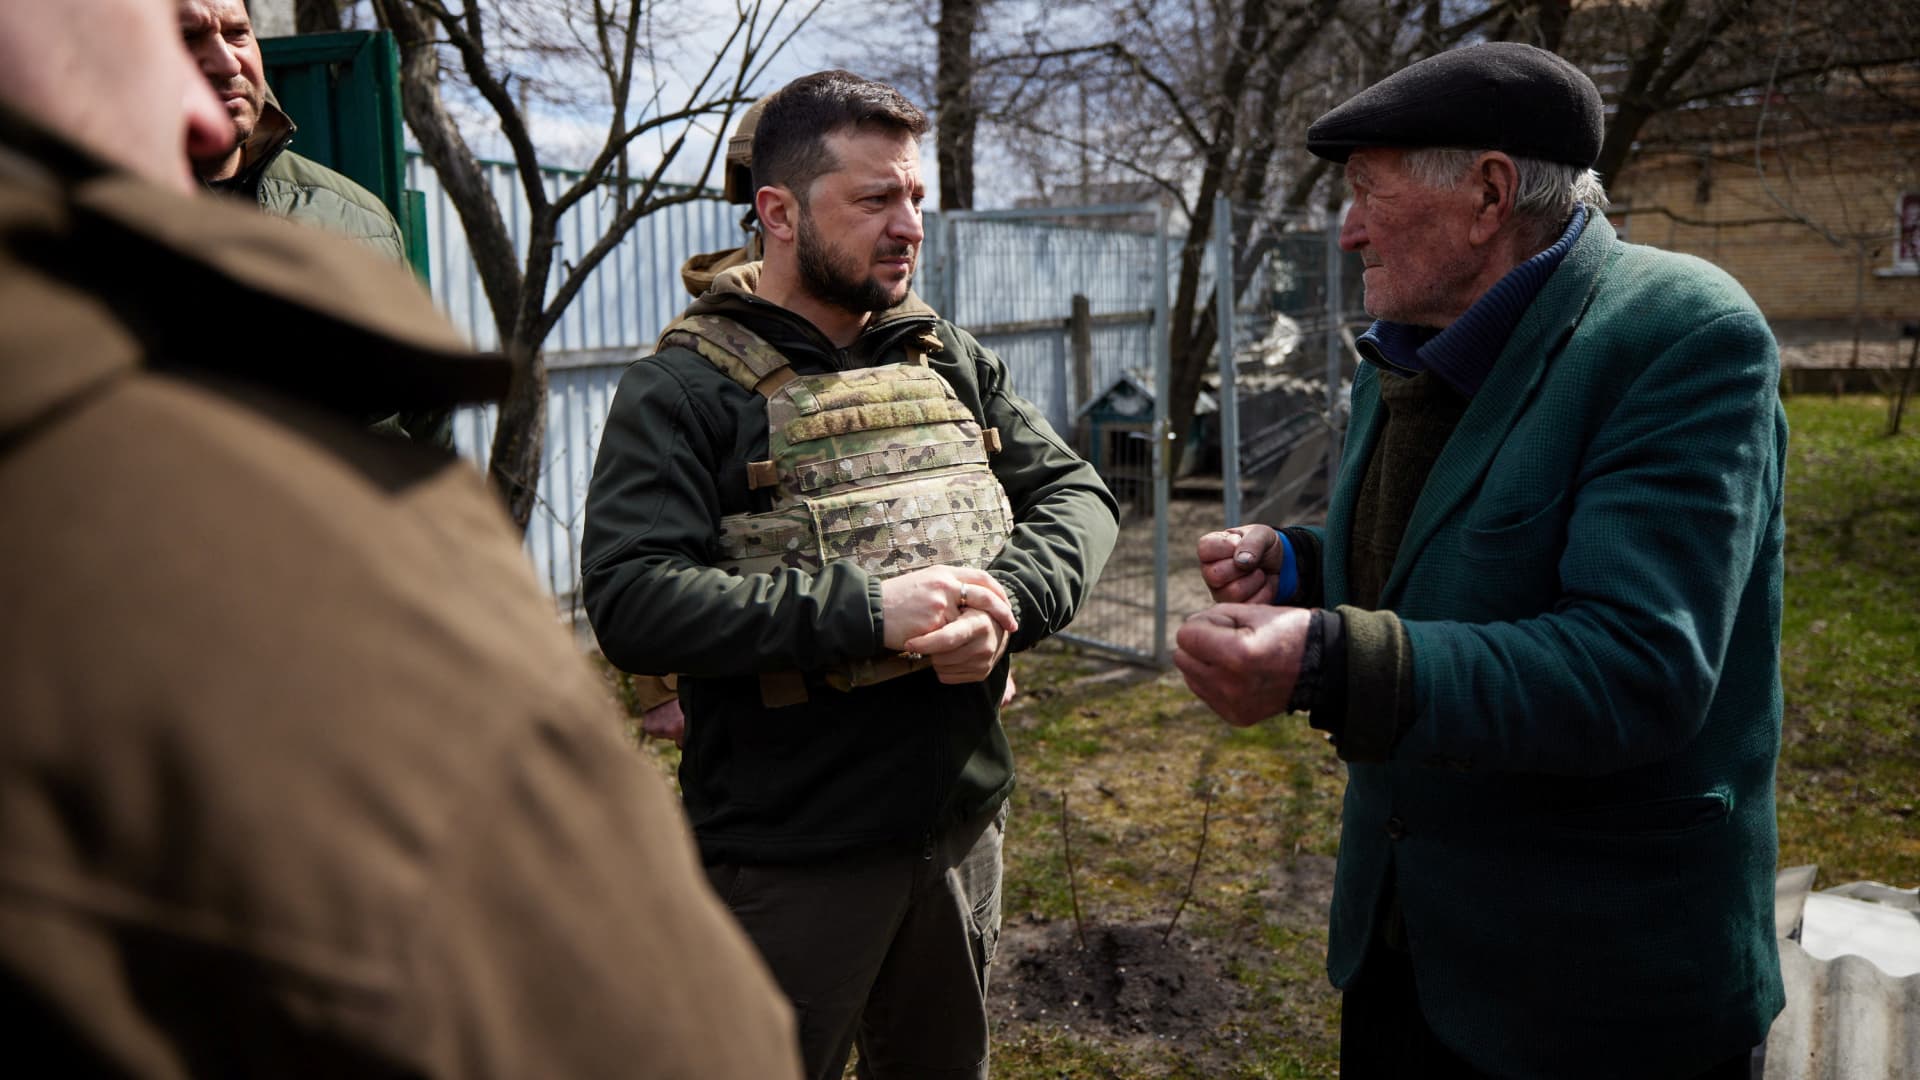 Ukraine's President Volodymyr Zelenskiy speaks to a local resident, as Russia's attack on Ukraine continues, in the town of Bucha, outside of Kyiv, Ukraine April 4, 2022. 